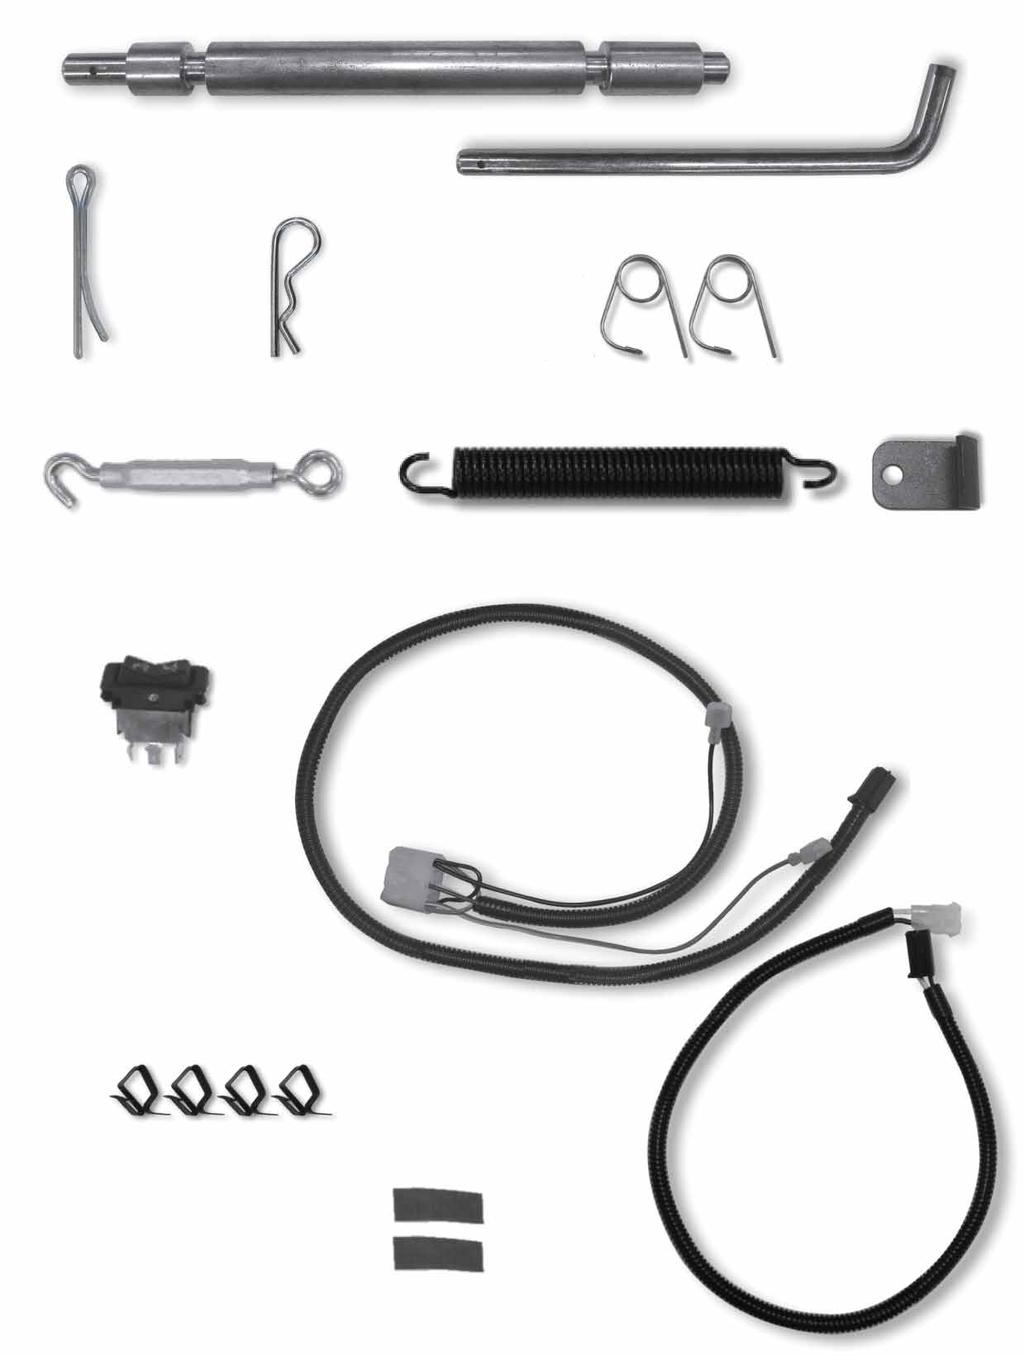 Hardware Bag Contents A - HITCH SUPPORT SHAFT B - HITCH LATCH PIN C - COTTER PIN D - HAIR PIN E - SAFETY CLIP (Qty.